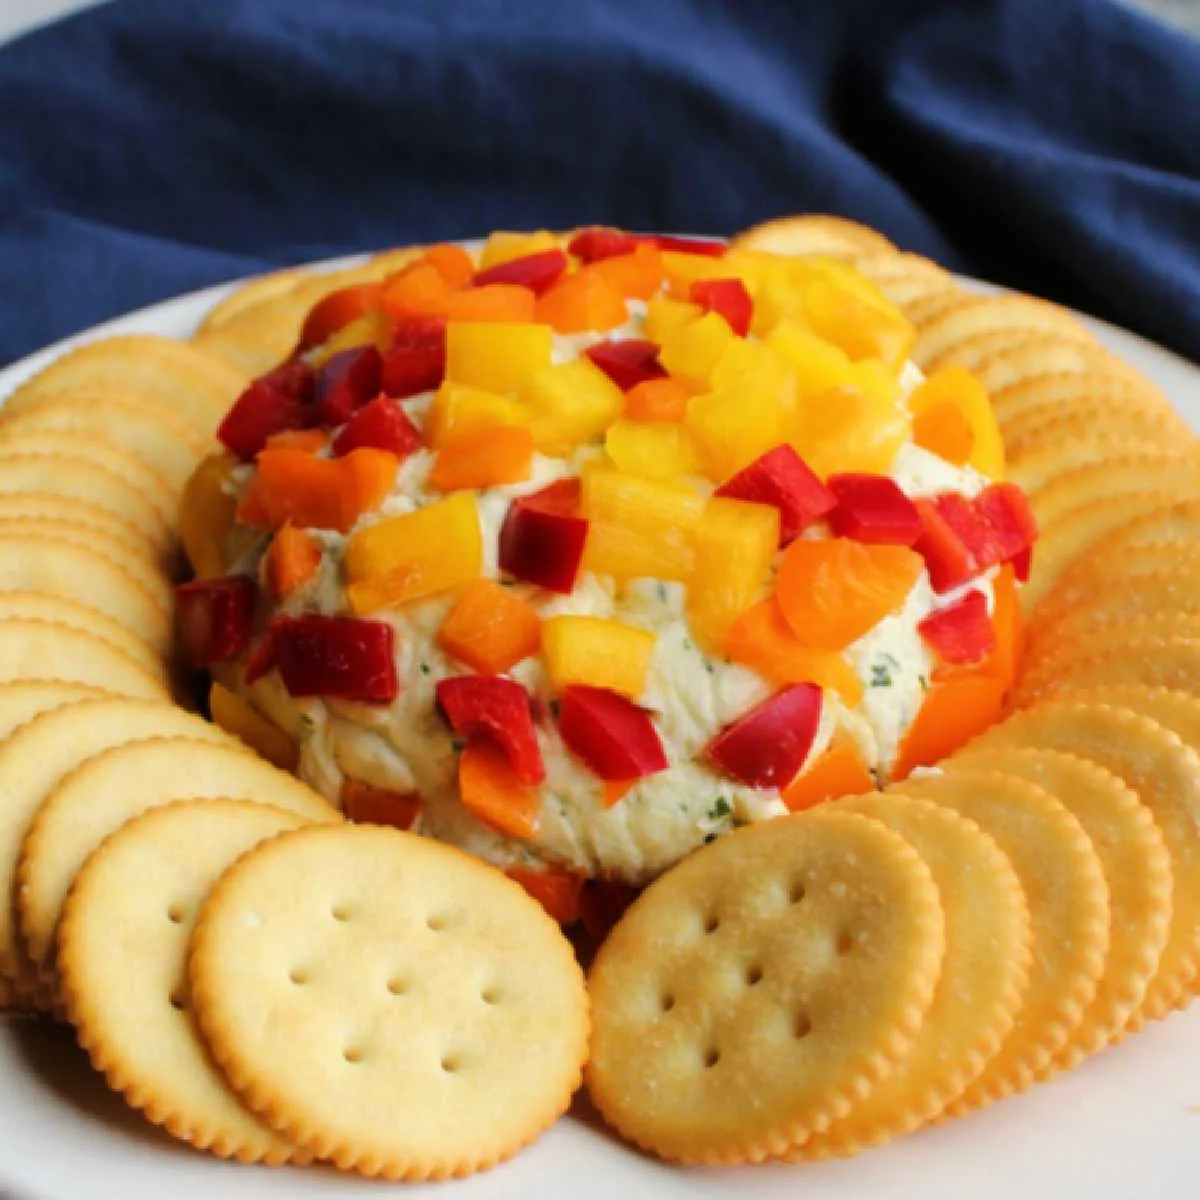 Creamy havarti cheese ball coated in diced red, yellow, and orange bell pepper on plate surrounded by crackers, ready to be served.